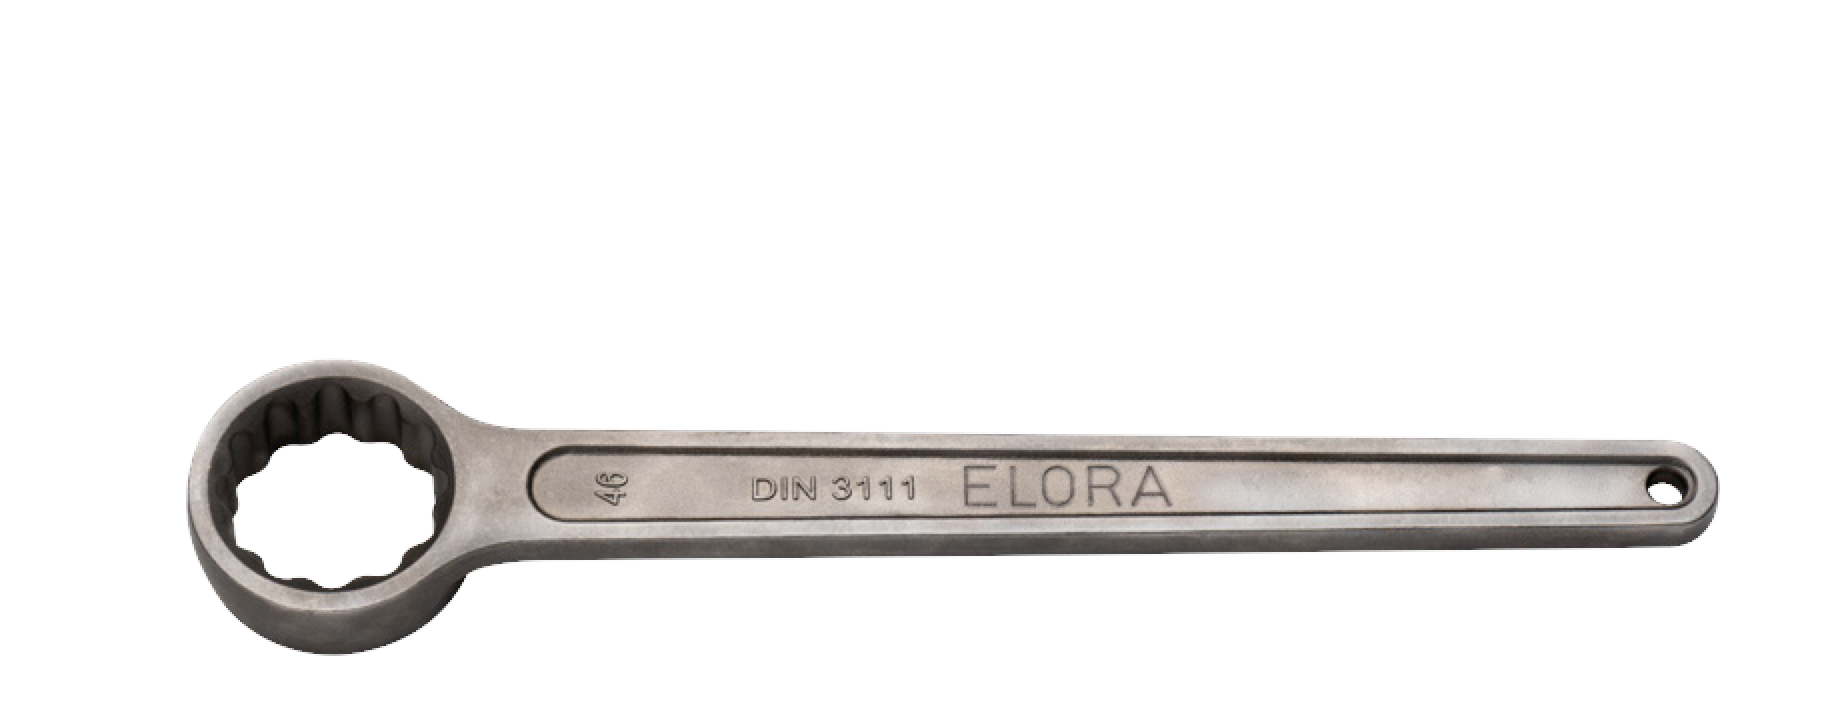 ELORA 88 Single Ring Ended Spanner 138-555mm (ELORA Tools) - Premium Single Ring Ended Spanner from ELORA - Shop now at Yew Aik.